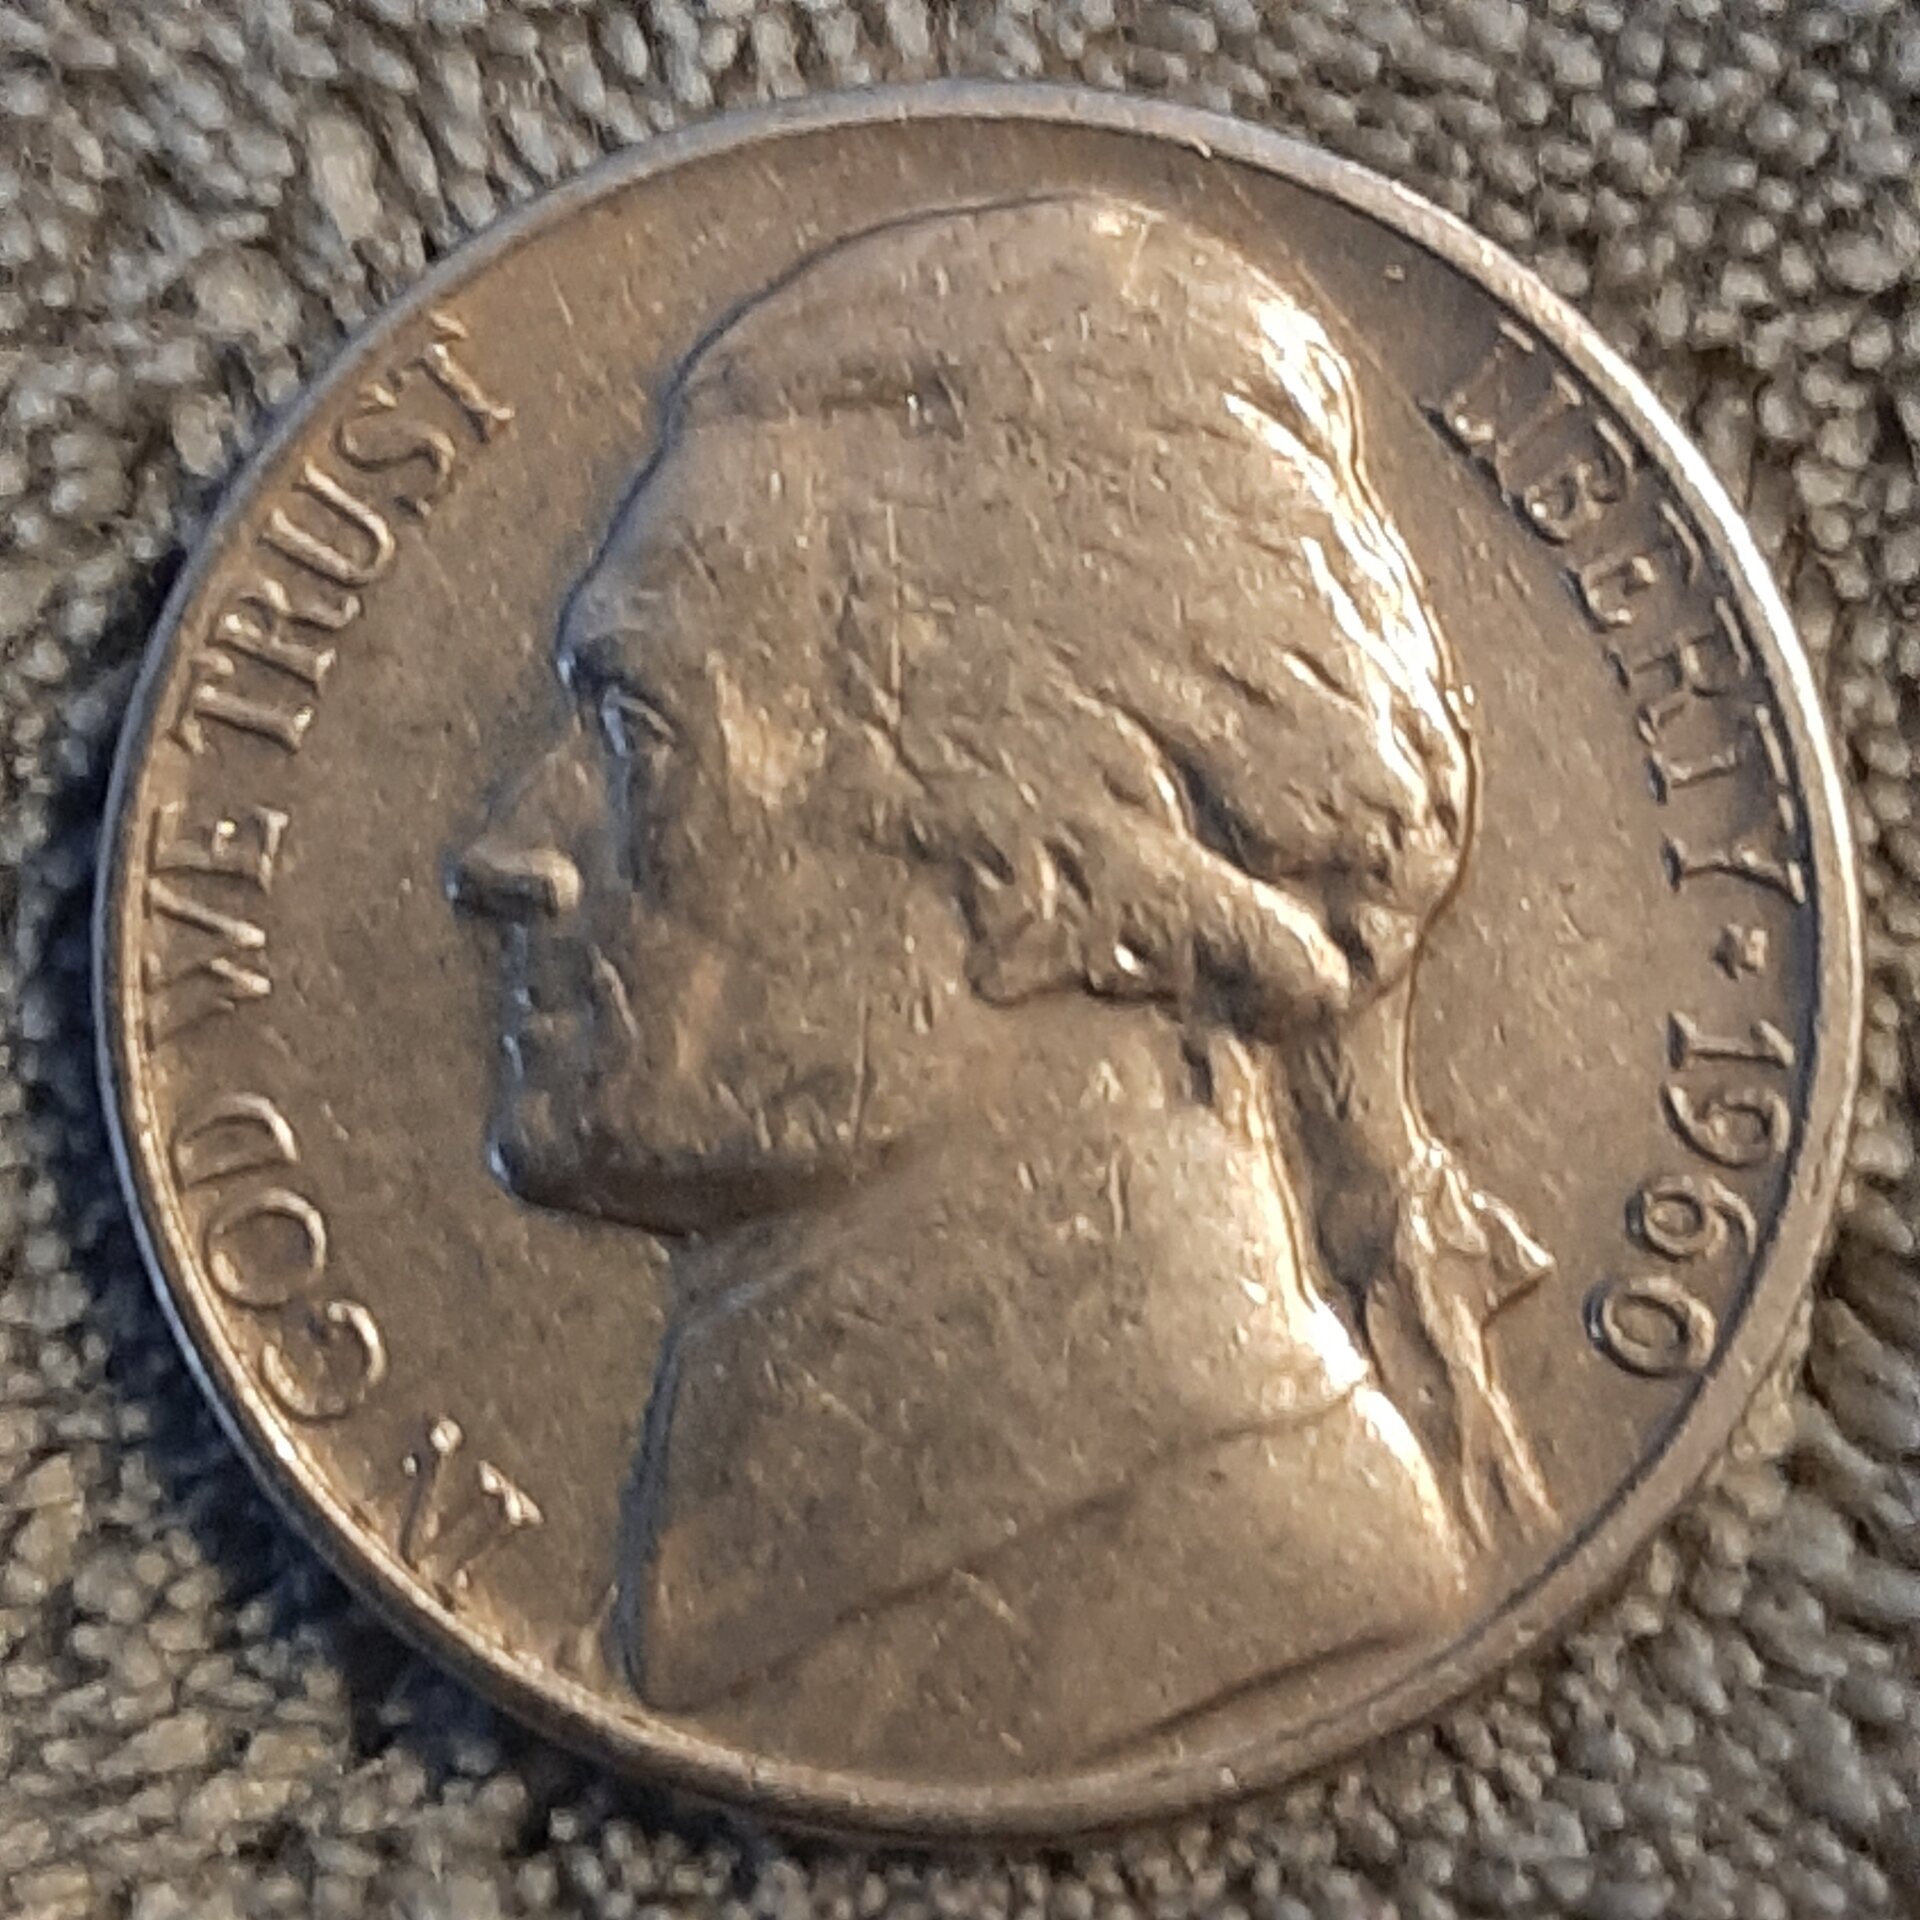 Possible 1960D RPM Nickel | Coin Talk